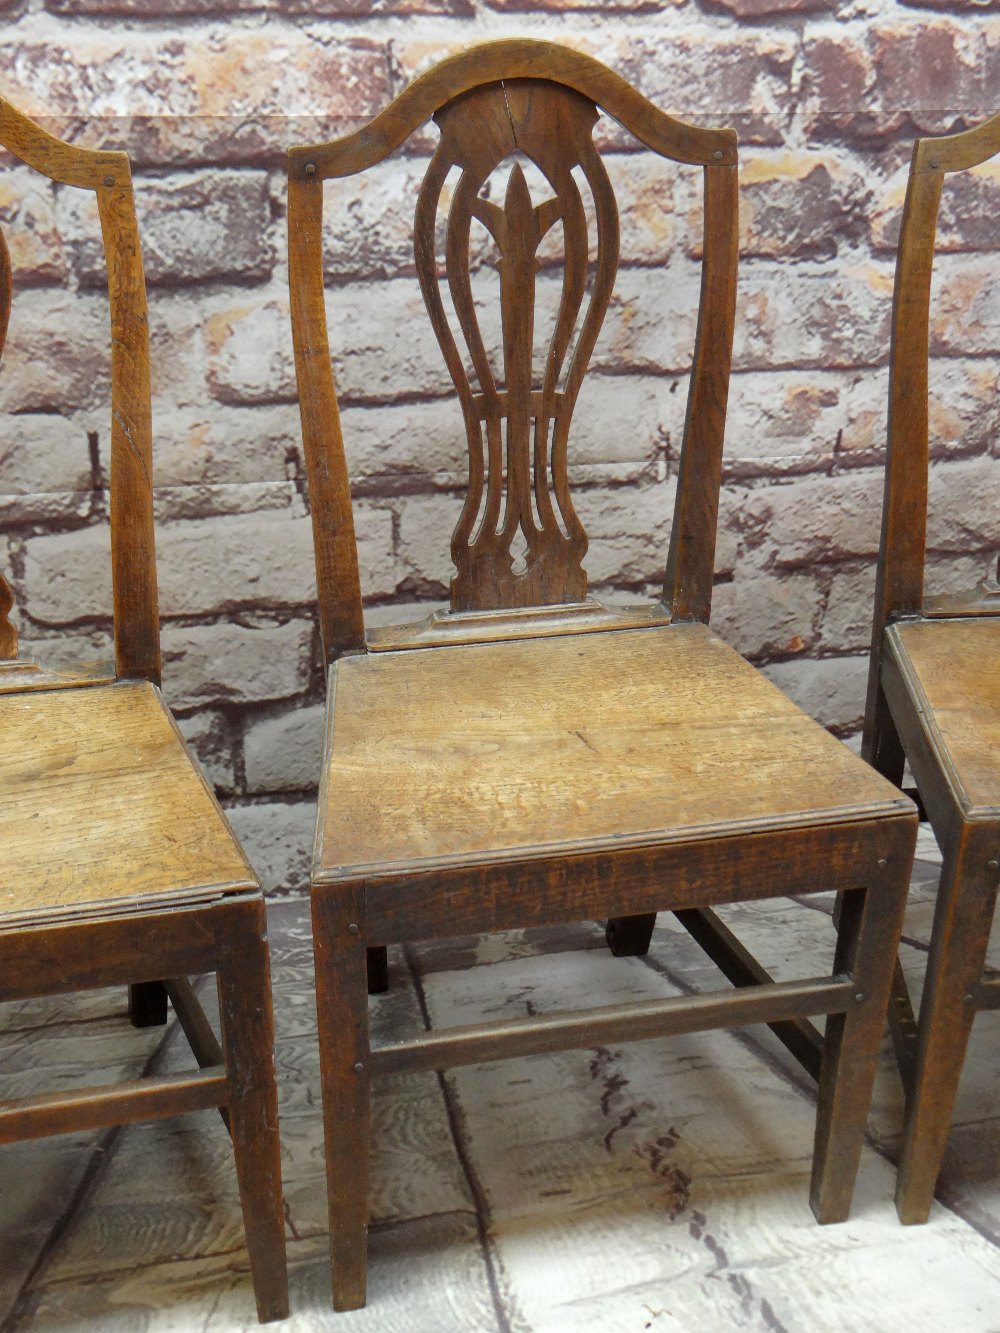 SET OF FOUR EARLY 19TH CENTURY OAK SIDE CHAIRS with pierced vase splats, tapering solid seats and - Image 2 of 3